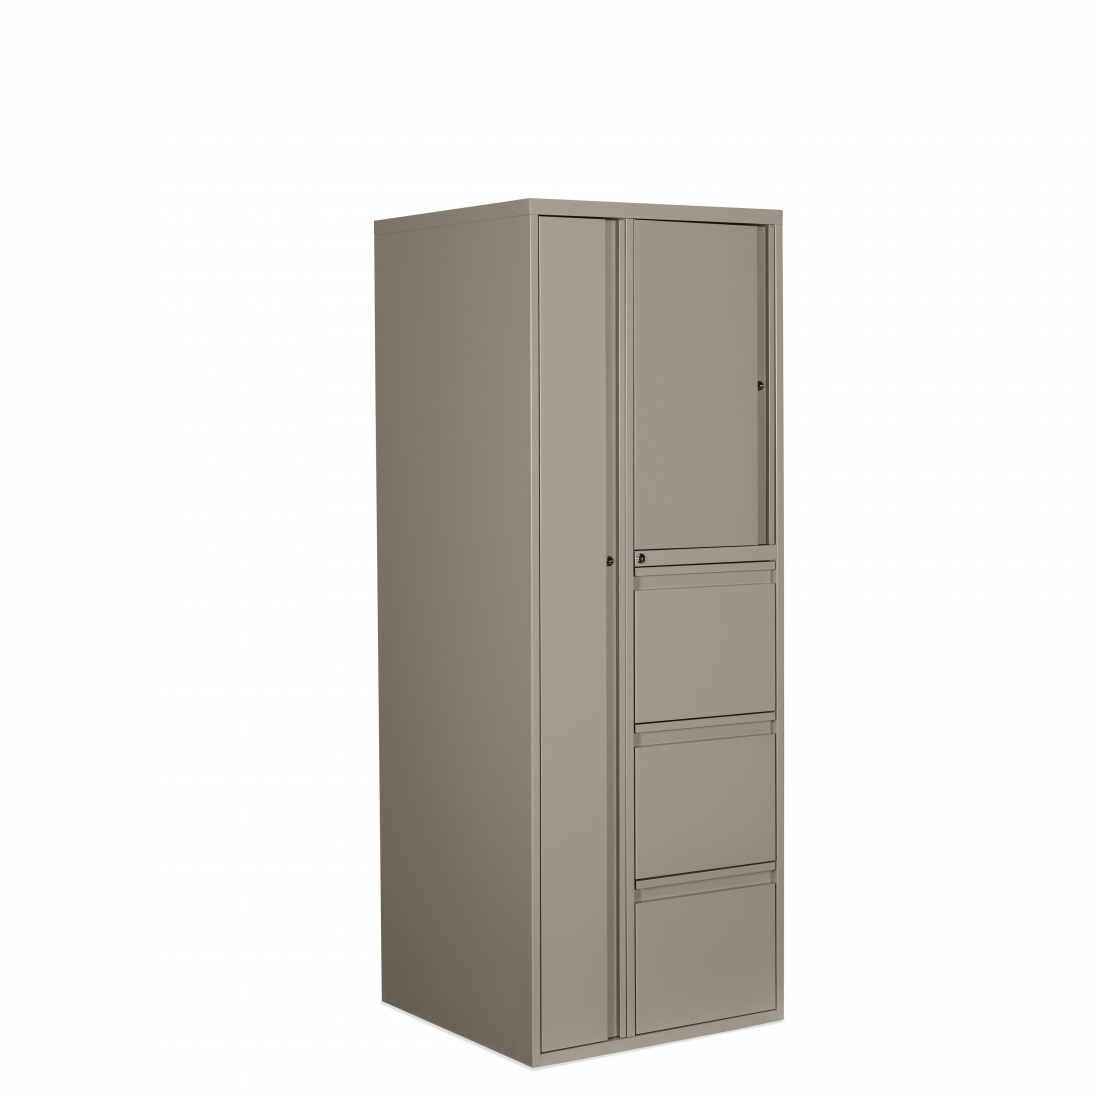 Personal Tower, Wardrobe - Left, Three File - Right